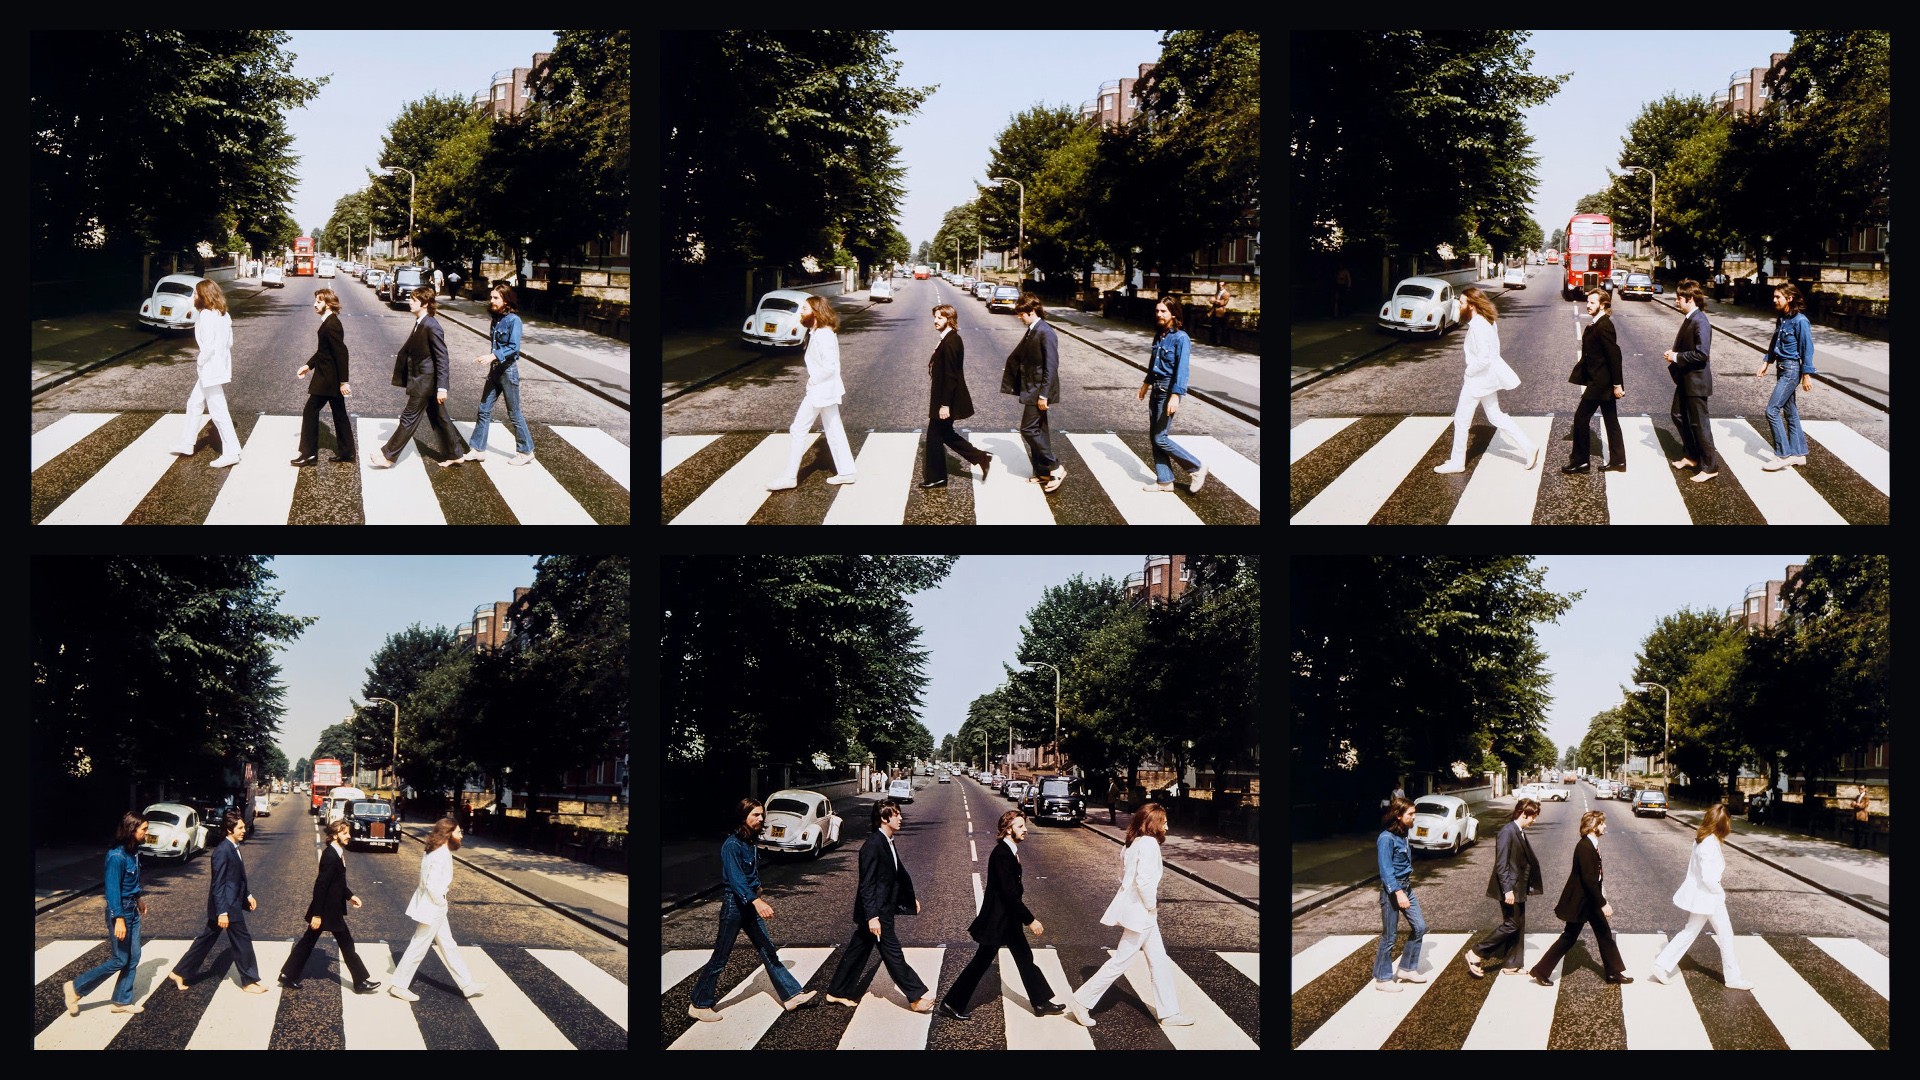 Men The Beatles Collage Street History Abbey Road 19x1080 Wallpaper Wallhaven Cc